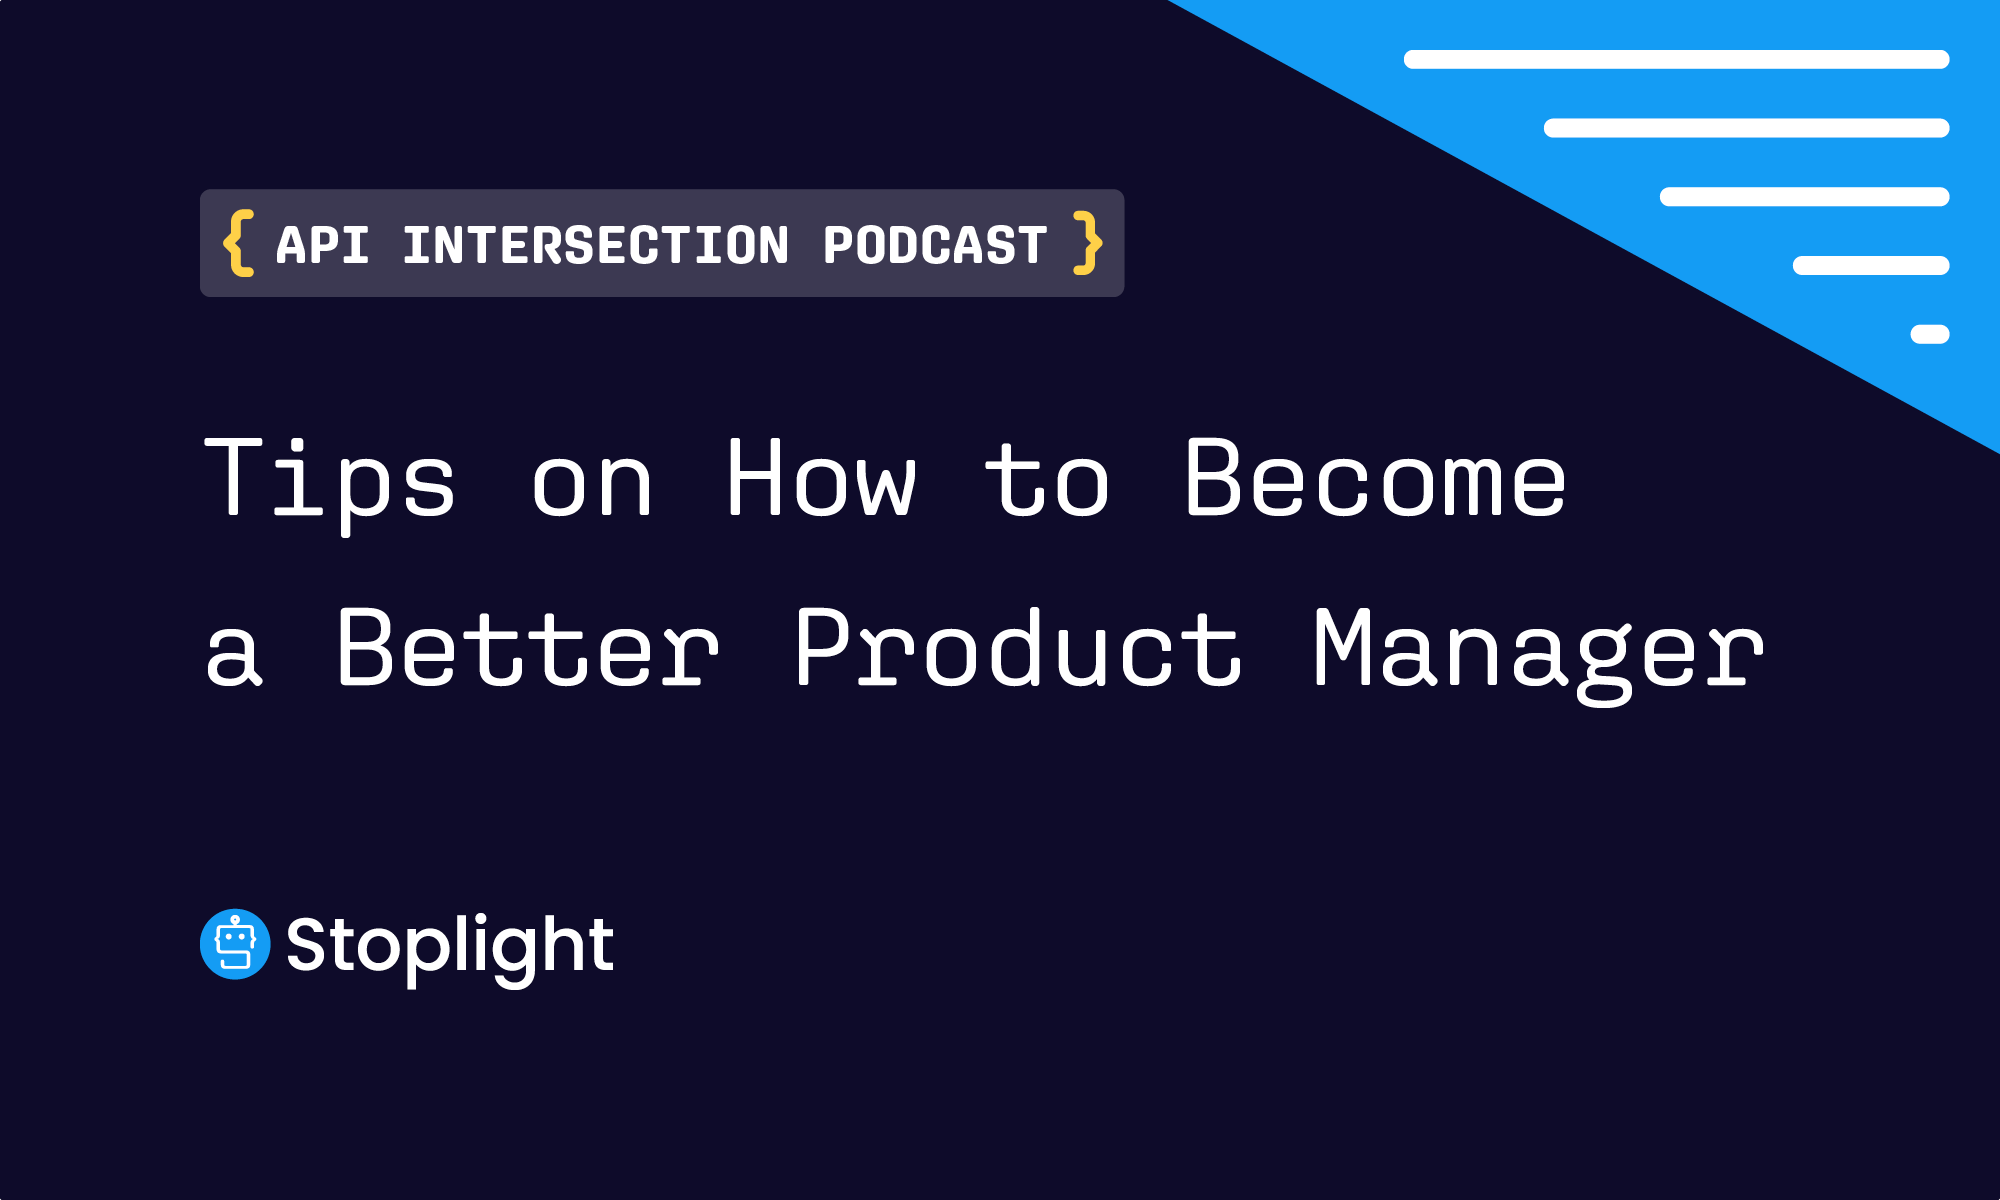 Tips on How to Become a Better Product Manager